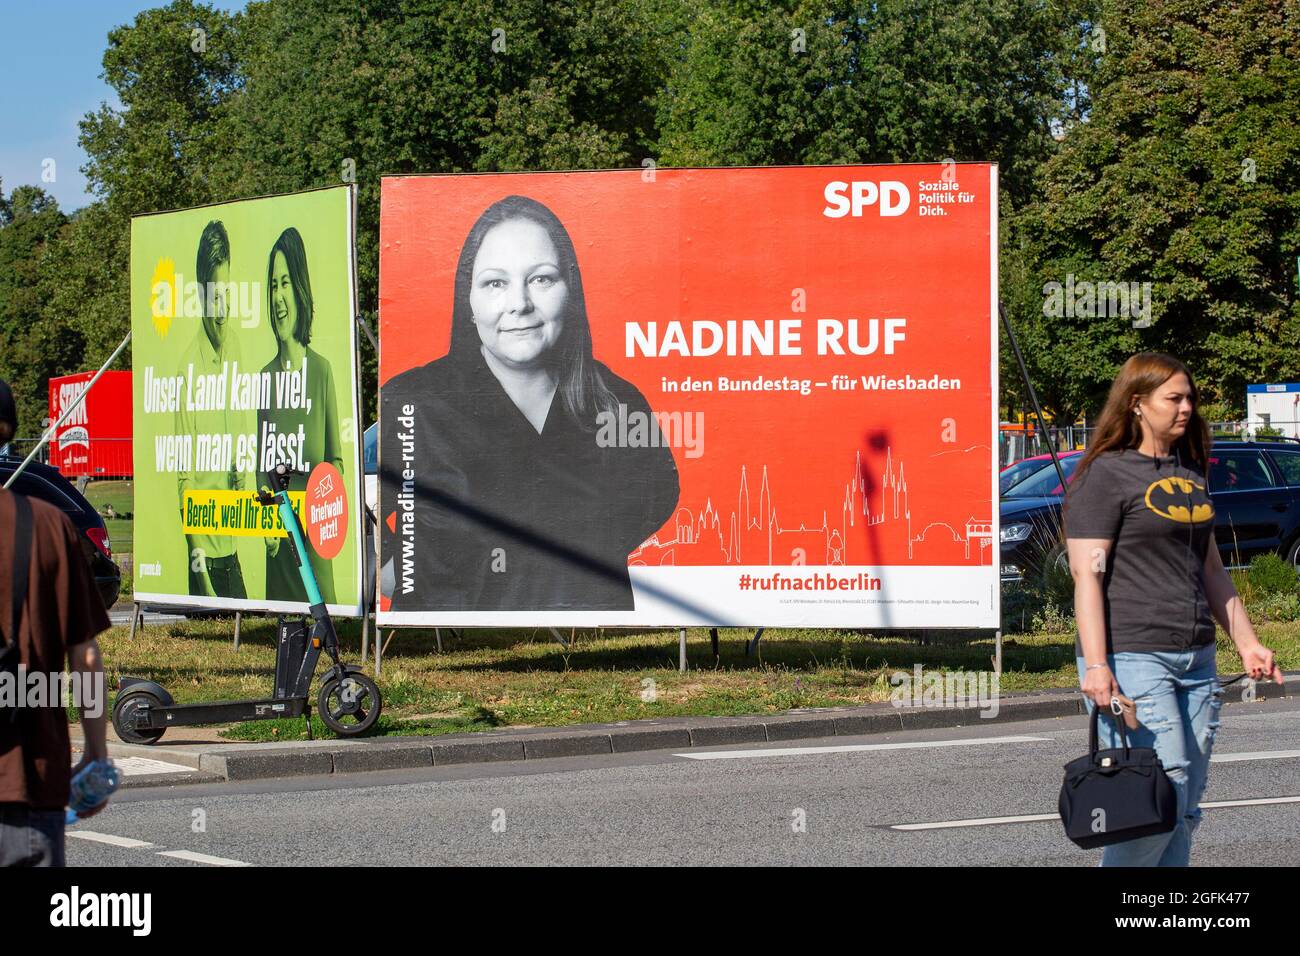 Wiesbaden, Germany - August 25, 2021: Election campaign billboards of the German party DIE GRUENEN and Social Democratic Party (SPD) in the city center of Wiesbaden, Hessen. Germany faces federal elections on September 26. Some road users in the background Stock Photo